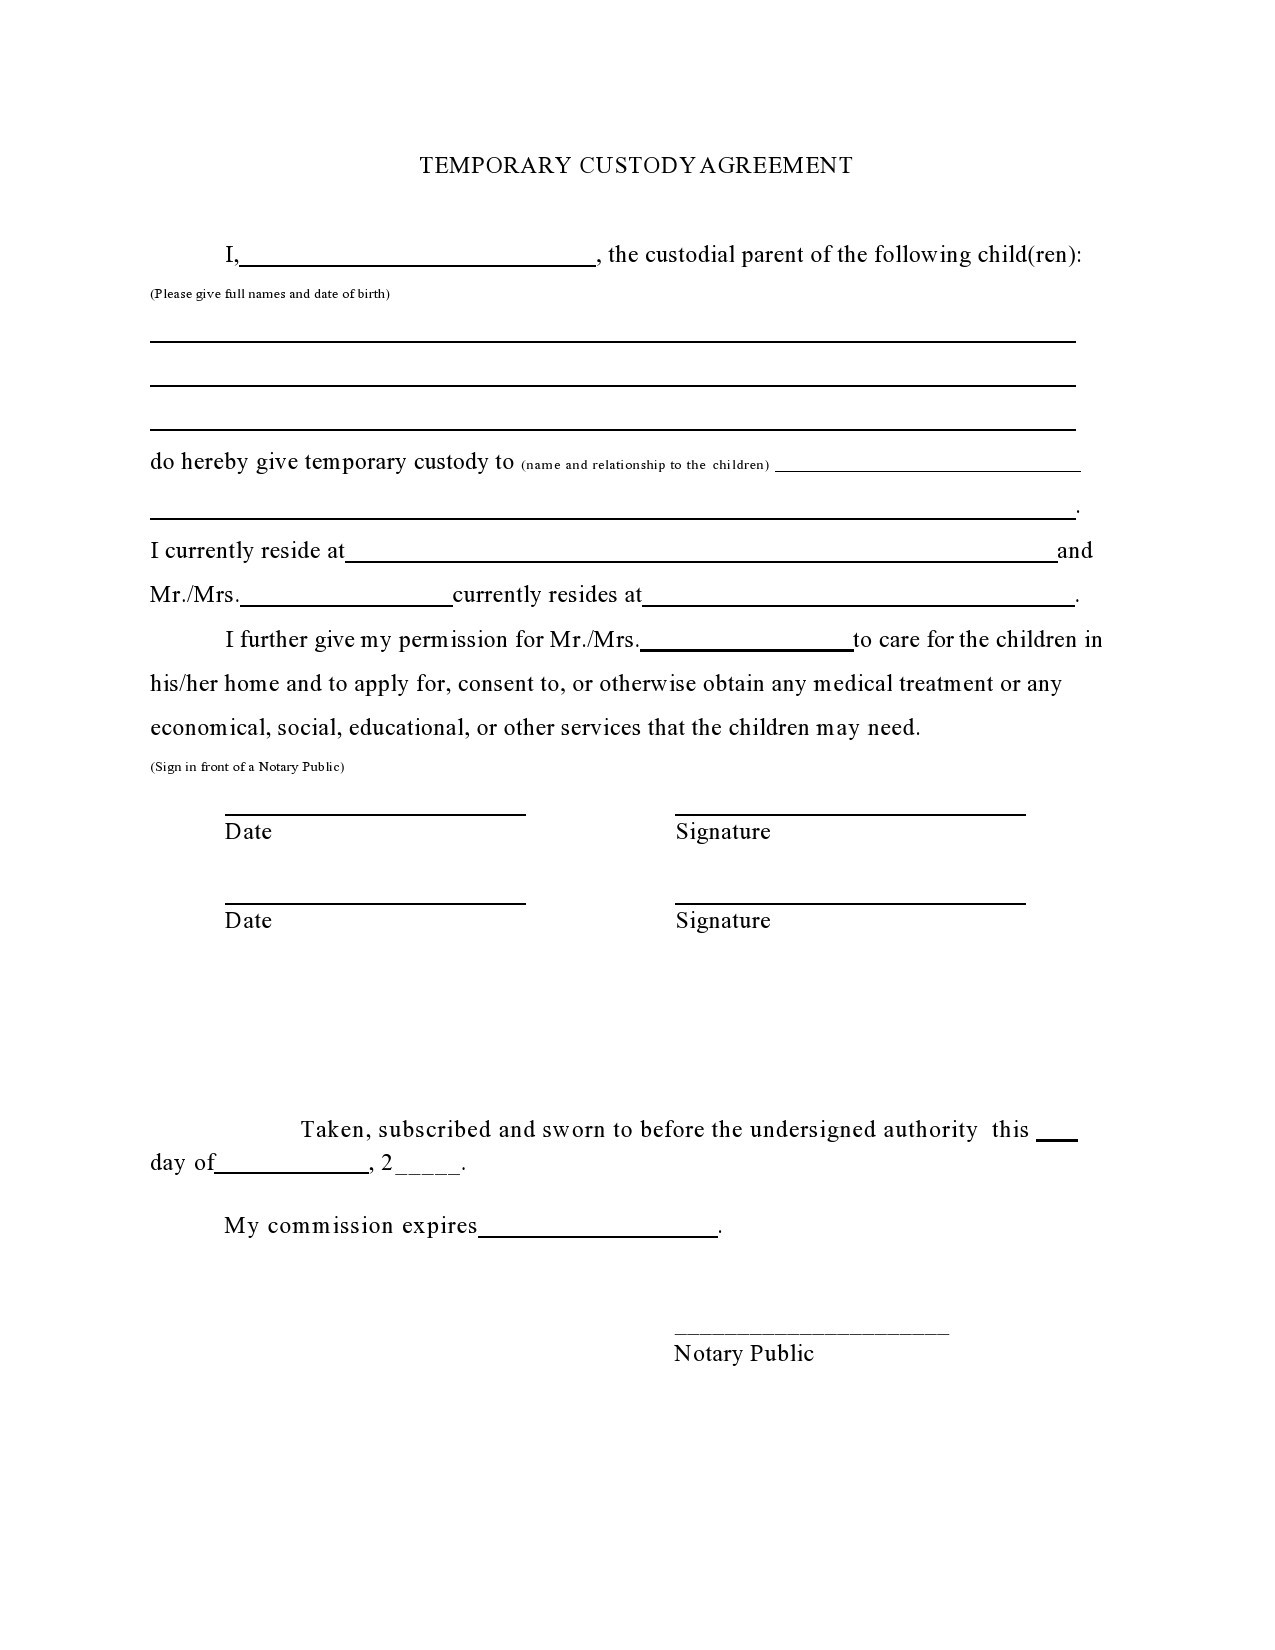 40 Printable Temporary Guardianship Forms [All States] ᐅ